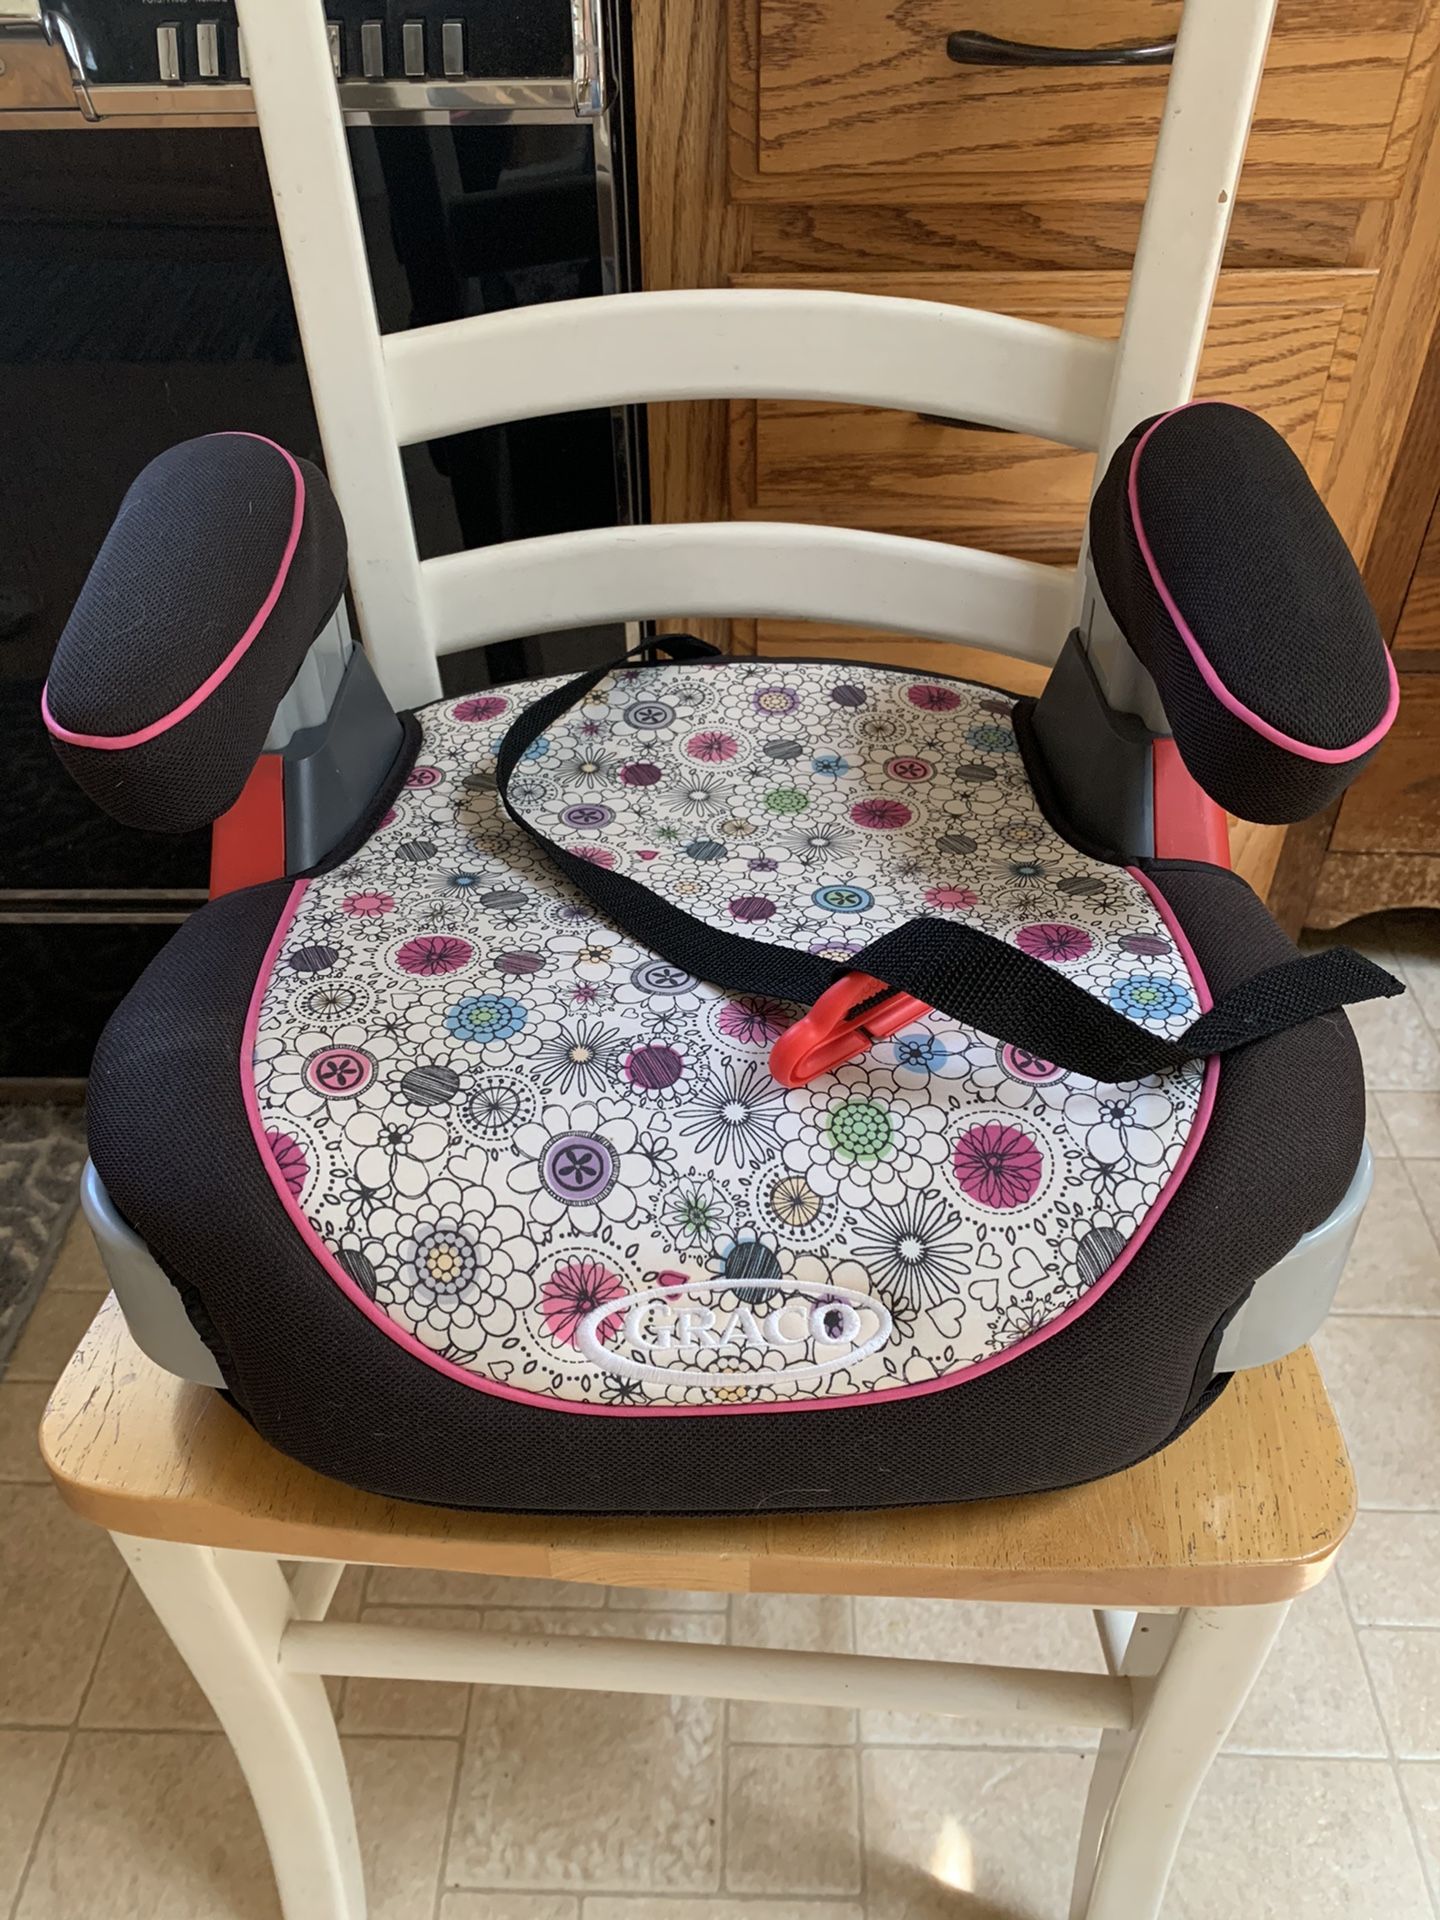 Like New Graco car booster seat